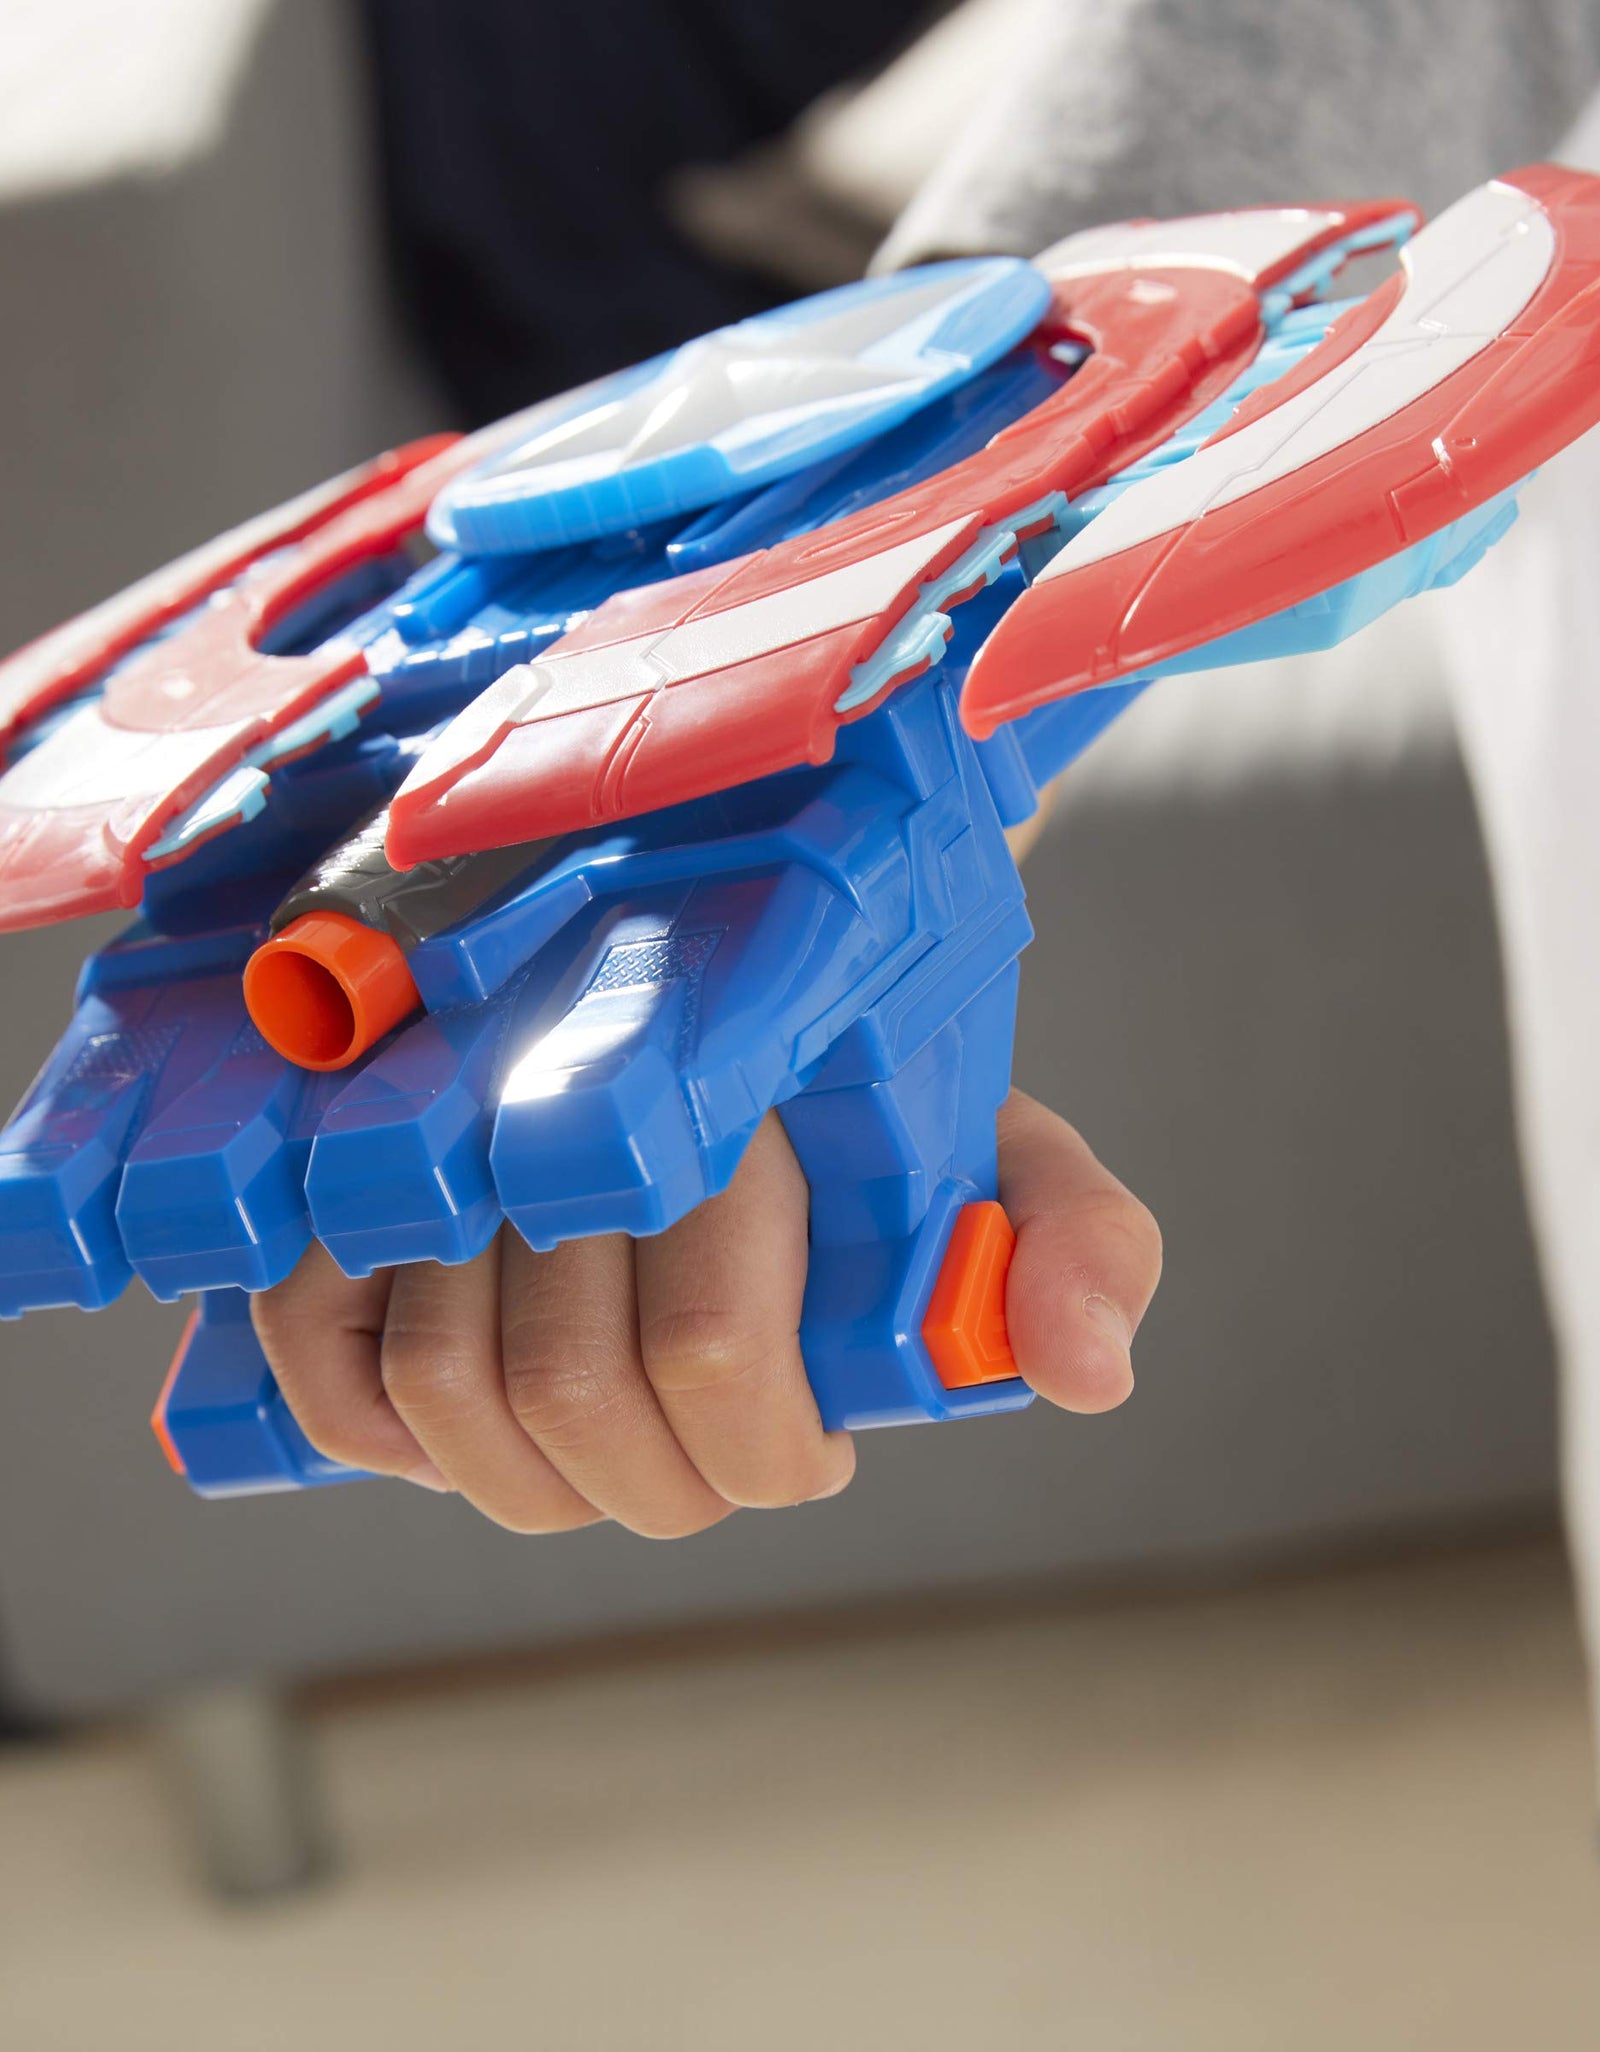 Avengers Hasbro Marvel Mech Strike Captain America Strikeshot Shield Role Play Toy with 3 NERF Darts, Pull Handle to Expand, for Kids Ages 5 and Up